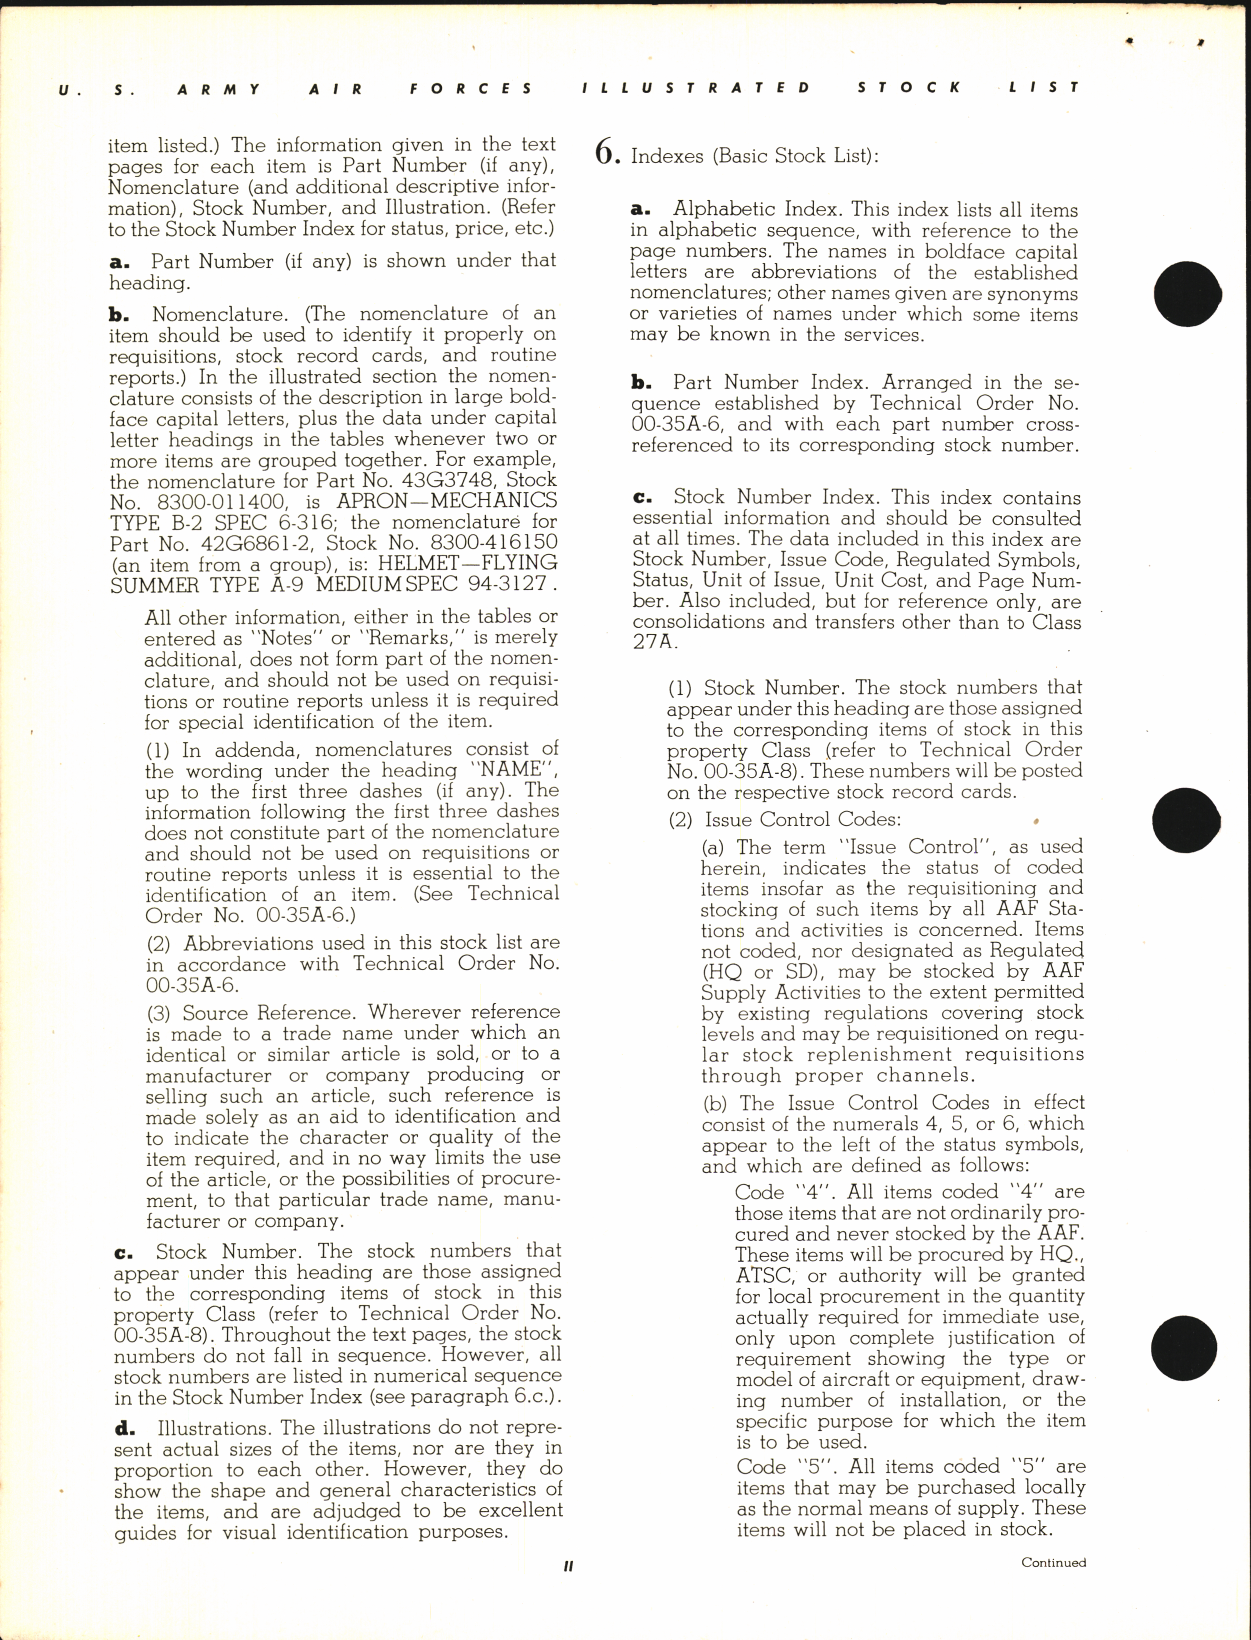 Sample page 4 from AirCorps Library document: Illustrated Stock List Clothing, Parachutes, Equipment and Supplies